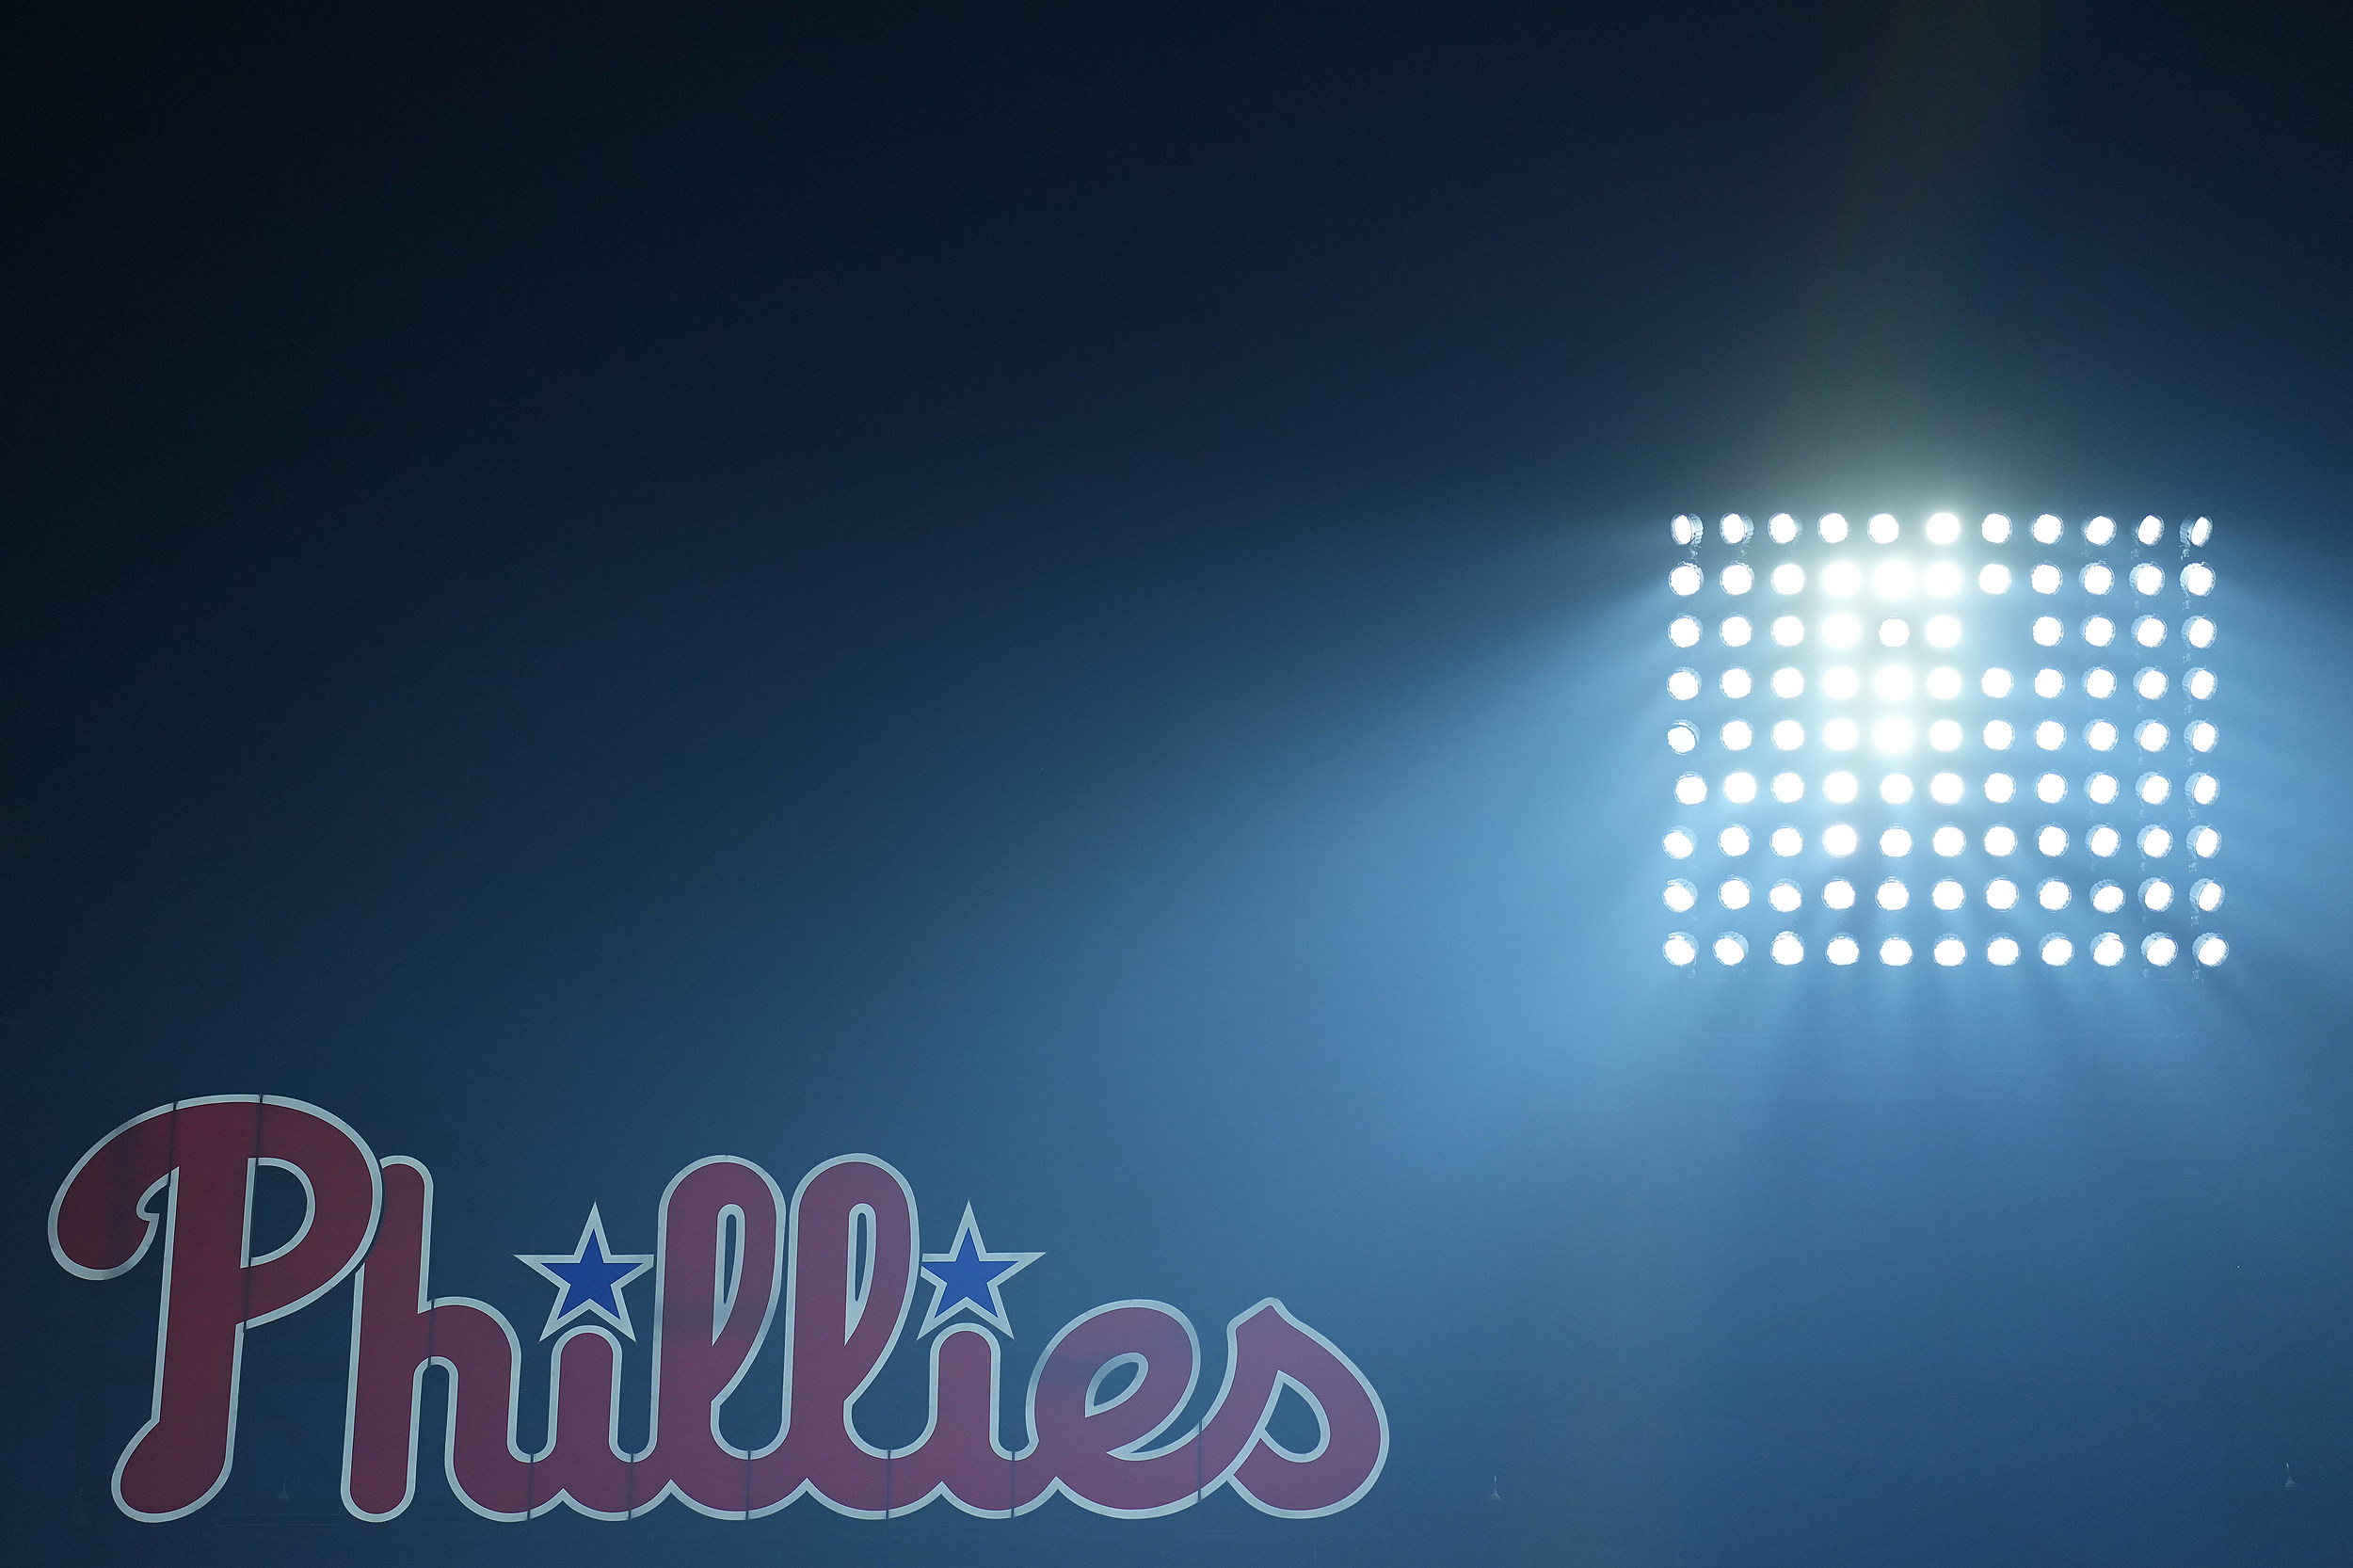 Phillies-Tigers game postponed due to air quality in Philly